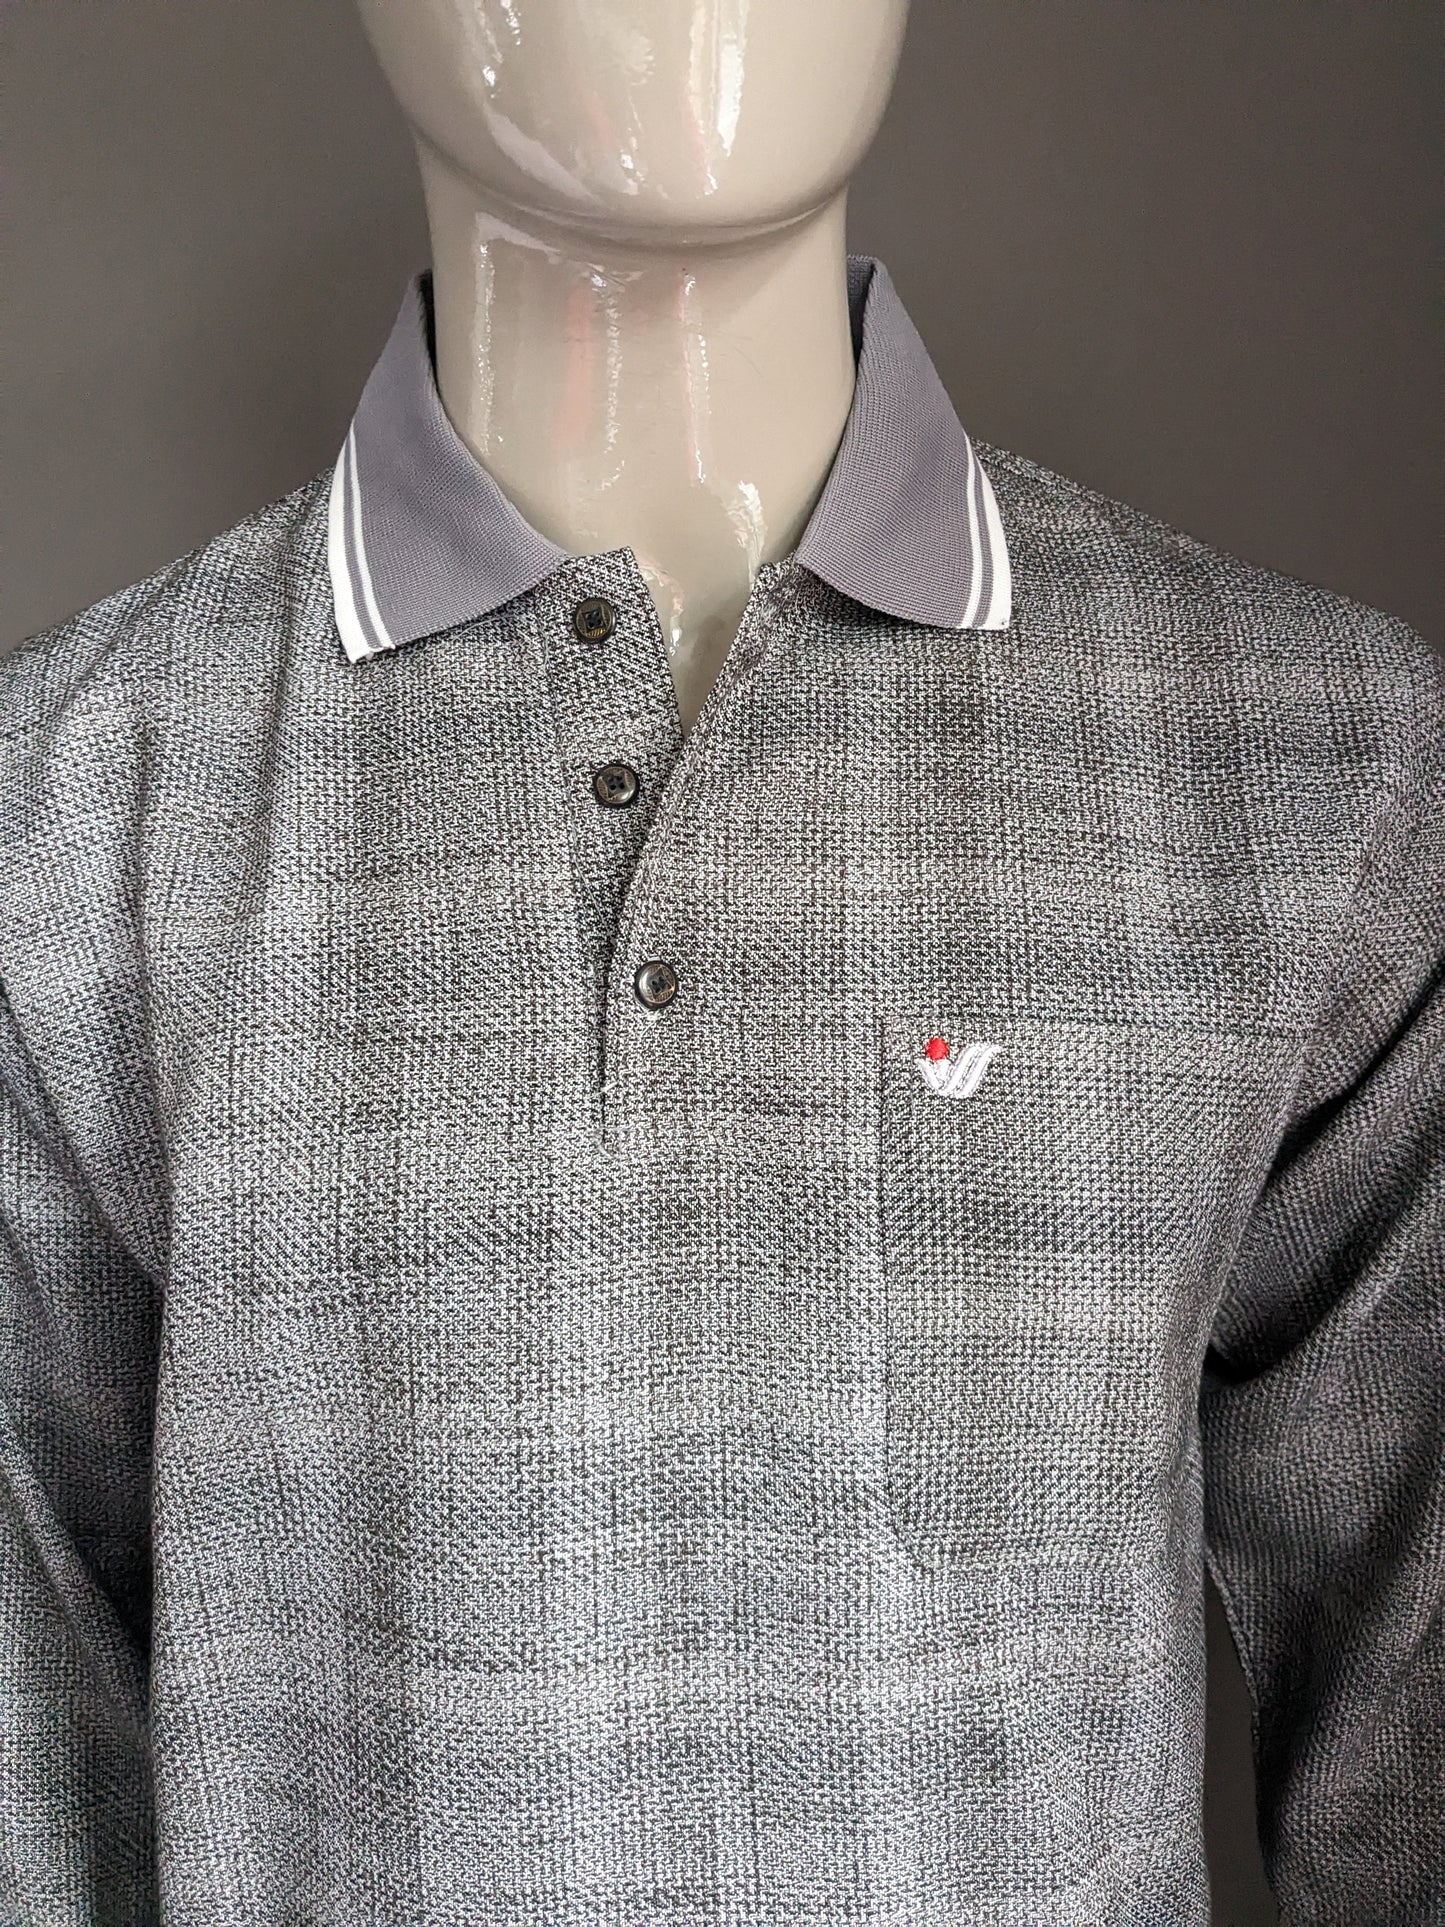 Vintage Original Wear Rainbow Polo Sweater. Gray mixed. Size L.